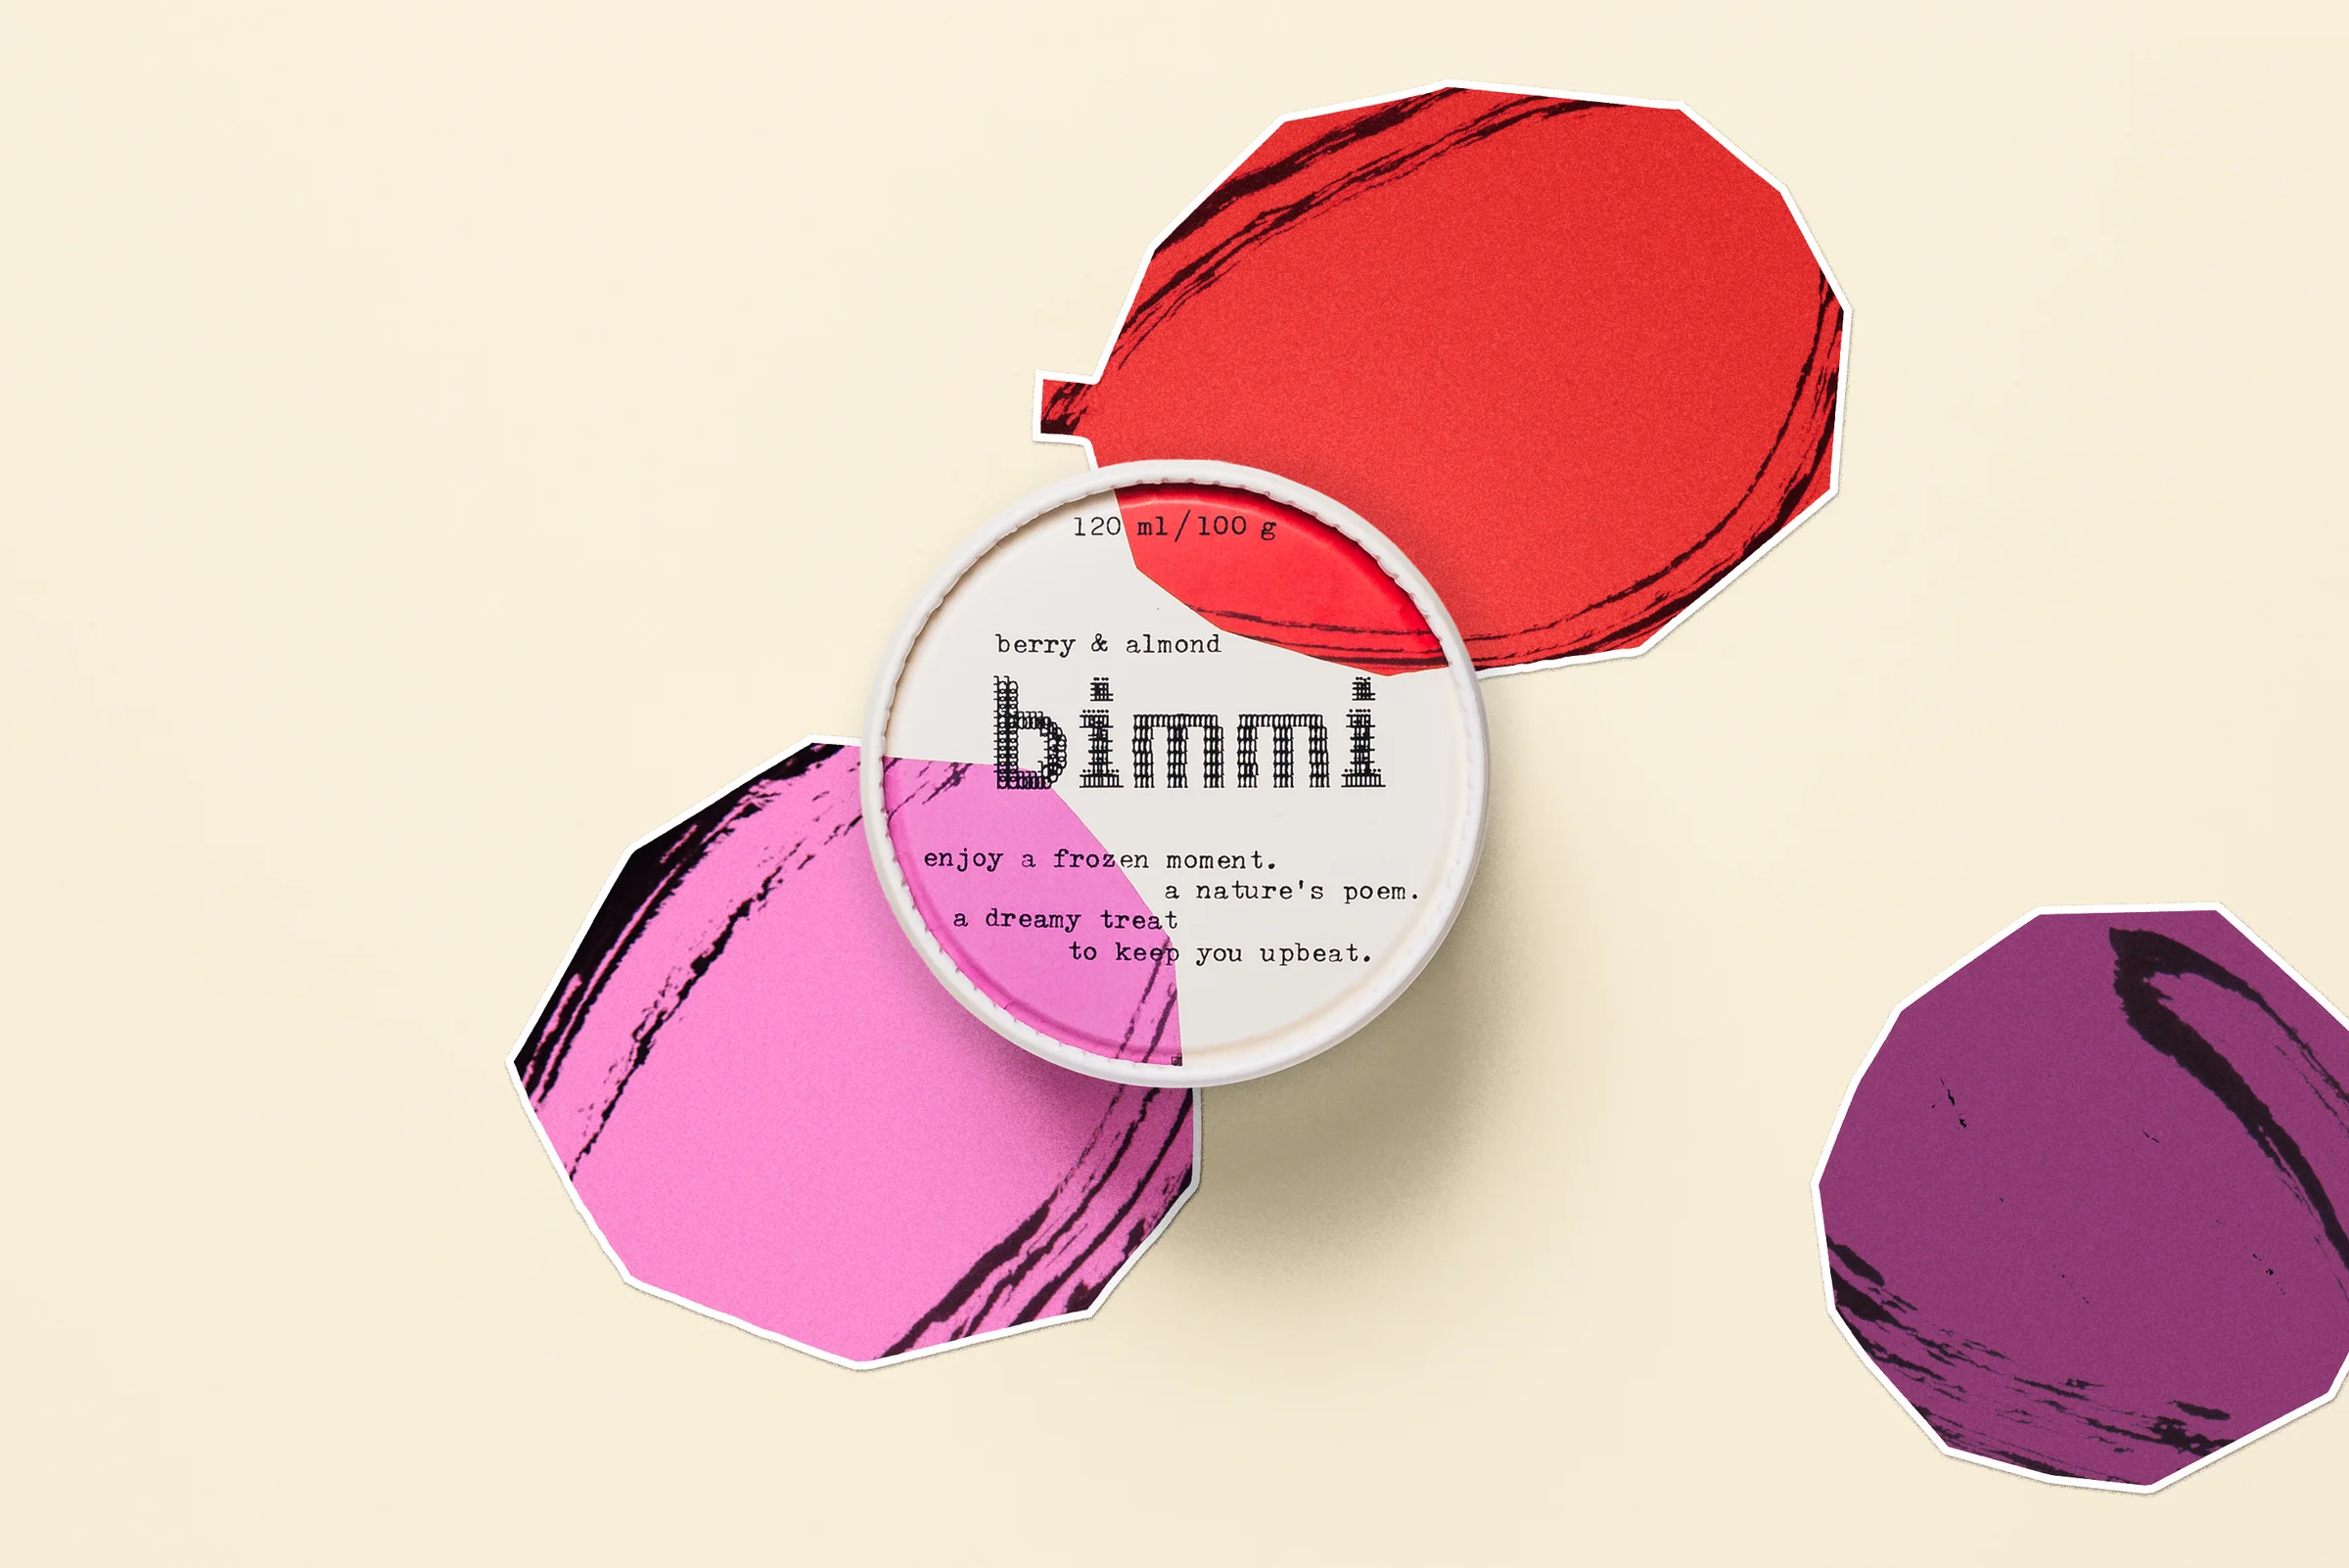 Logotype, packaging and concrete poetry collage designed by Swedish design studio Bedow for frozen smoothie brand Bimmi. 